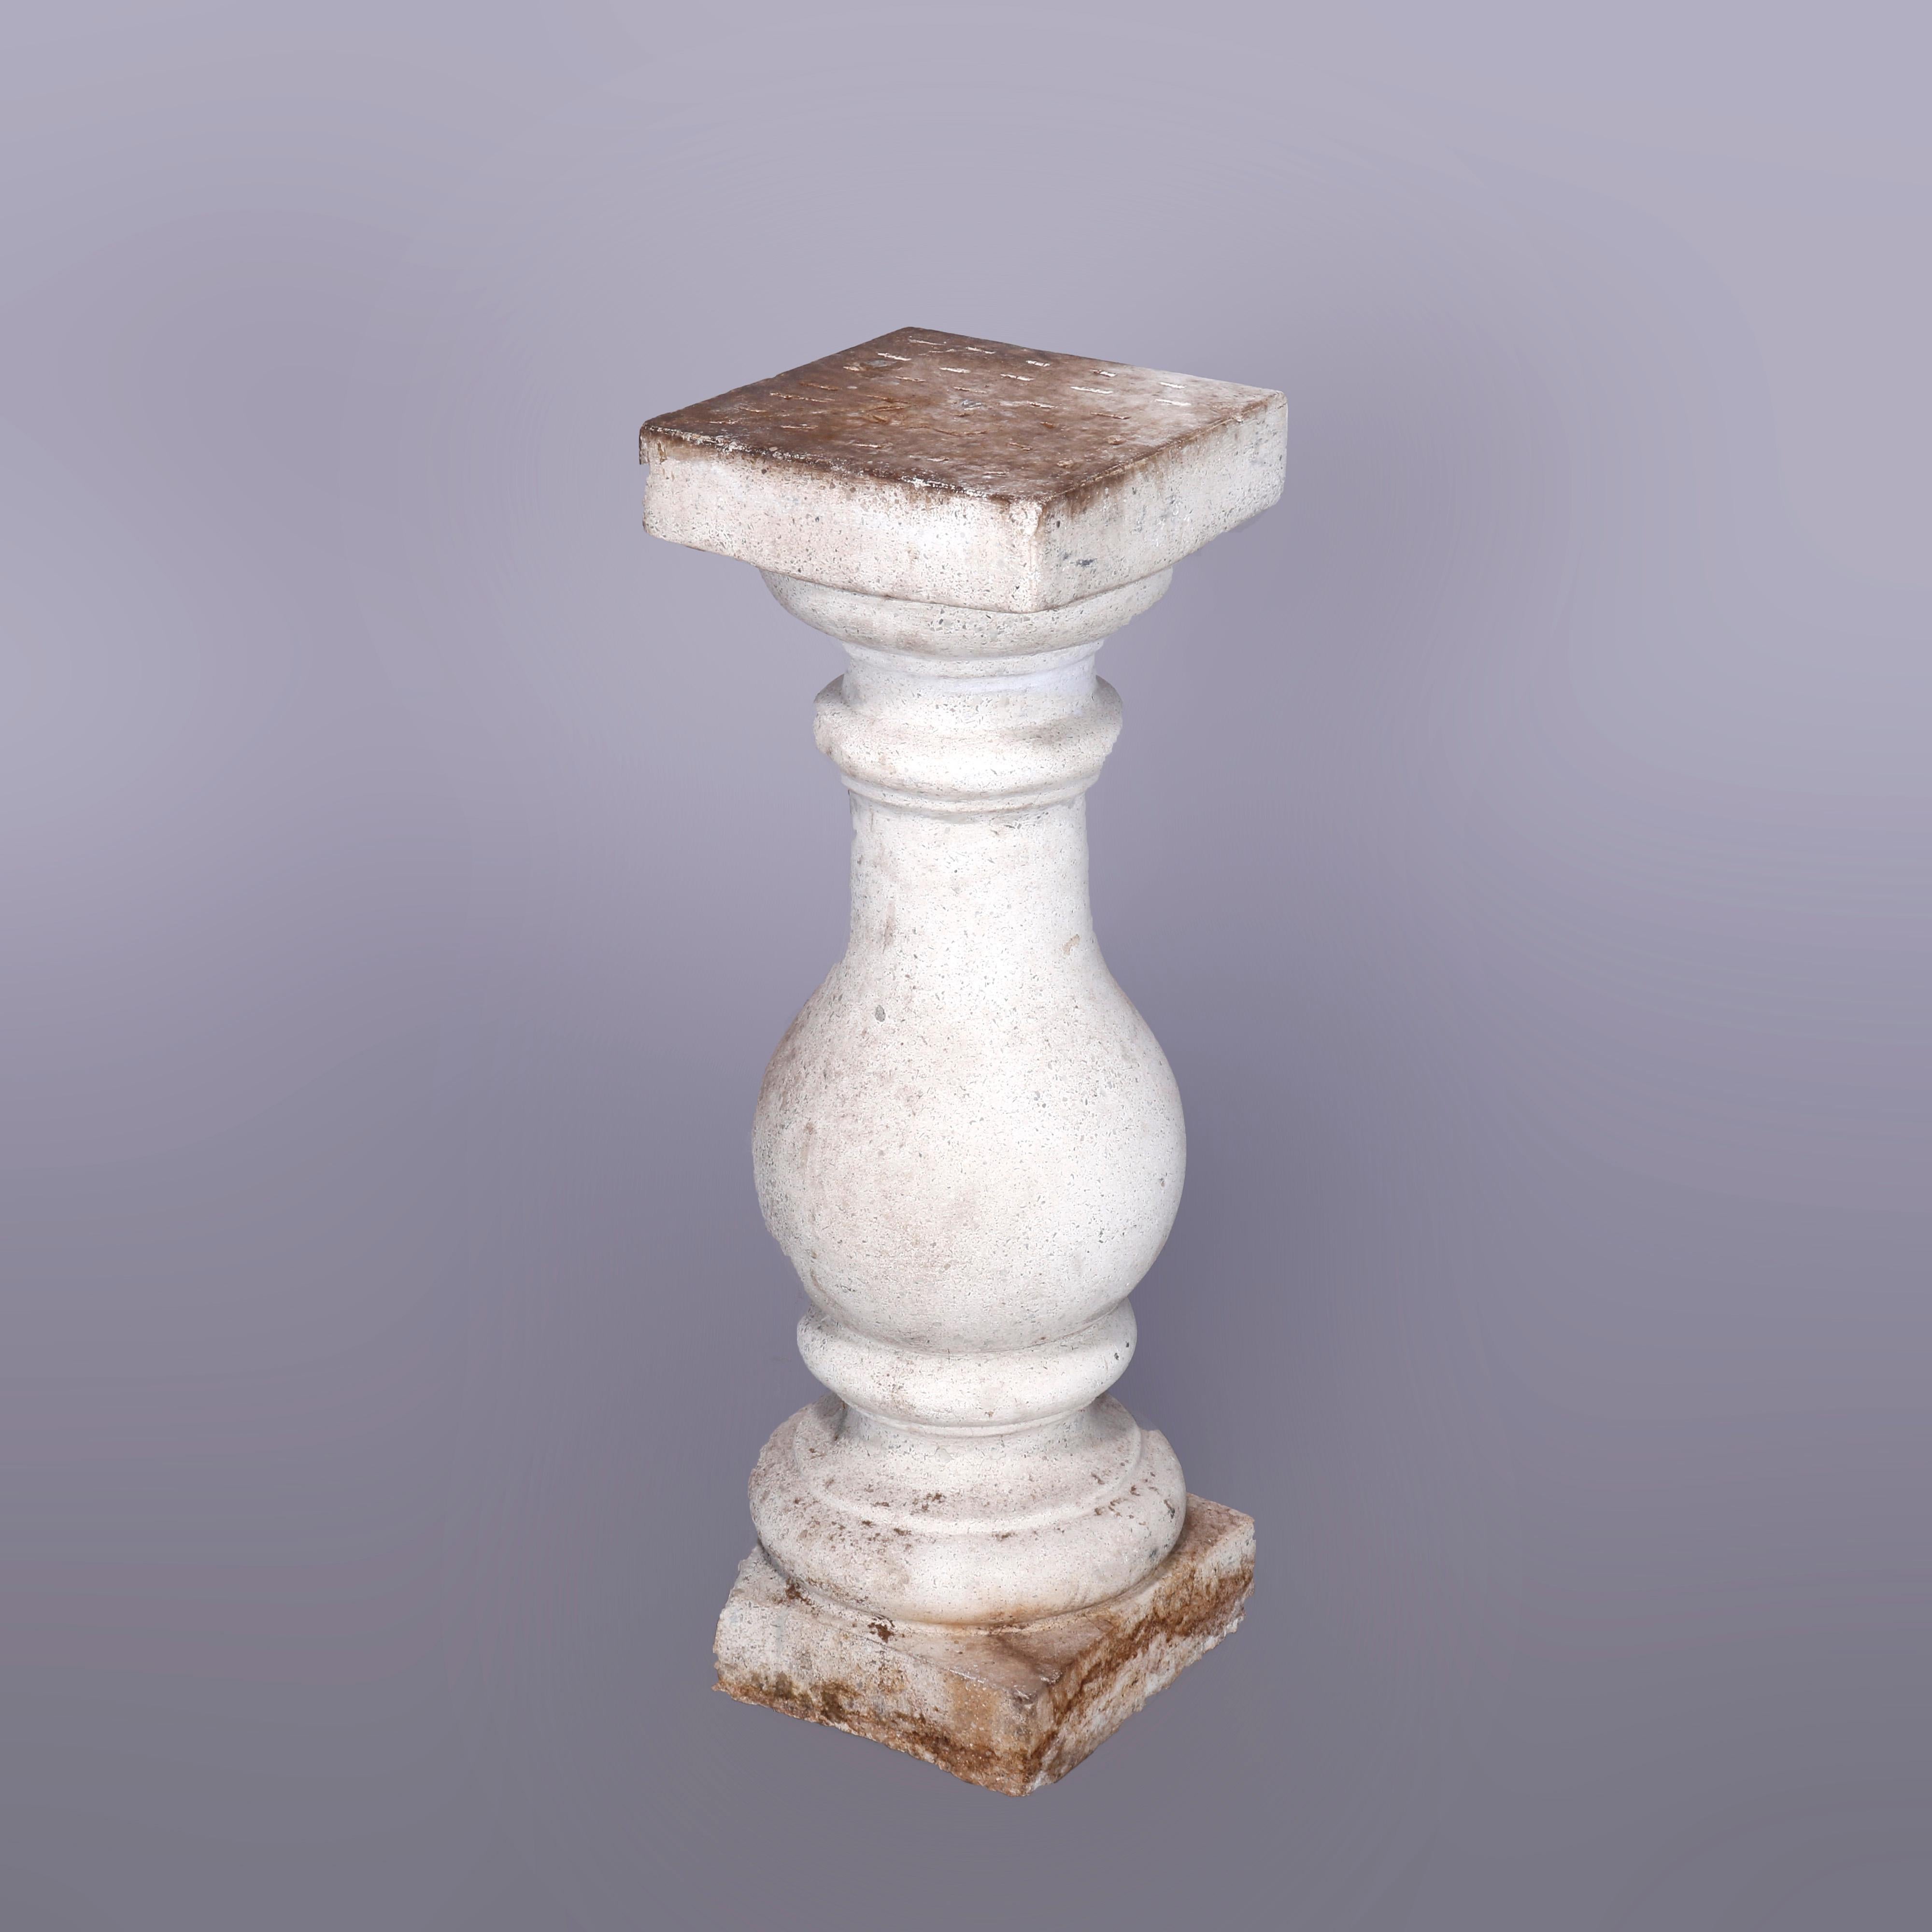 Classical Cast Hard Stone Balustrade Sculpture or Plant Display Pedestal 20th C In Good Condition For Sale In Big Flats, NY